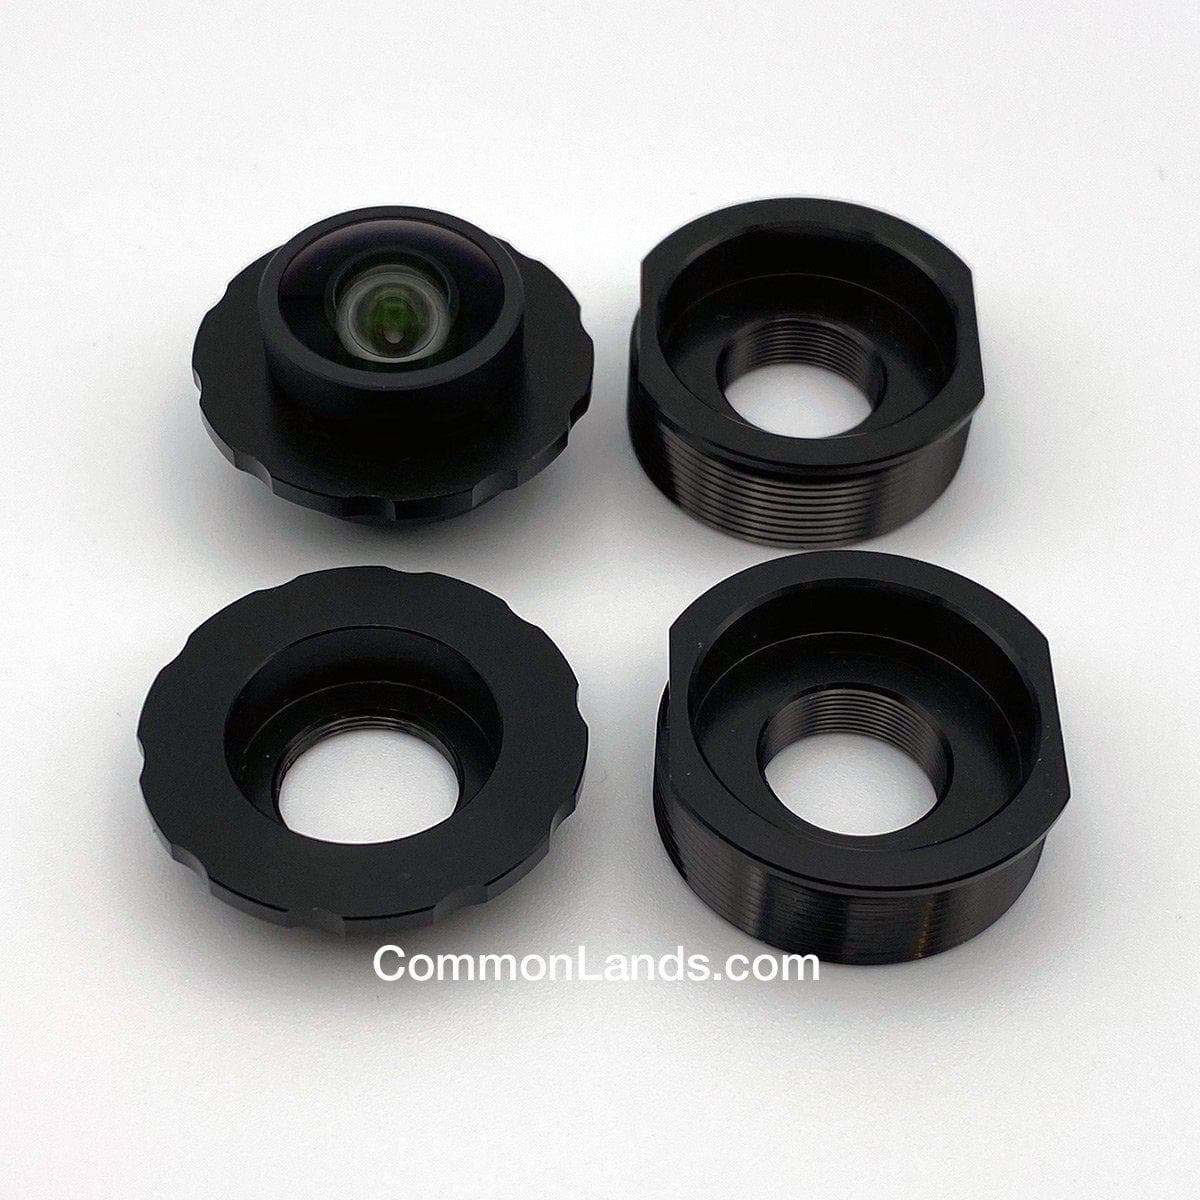 An adapter for M12 Lenses to C Mount Cameras. For S-Mount Lenses and C Mount cameras.